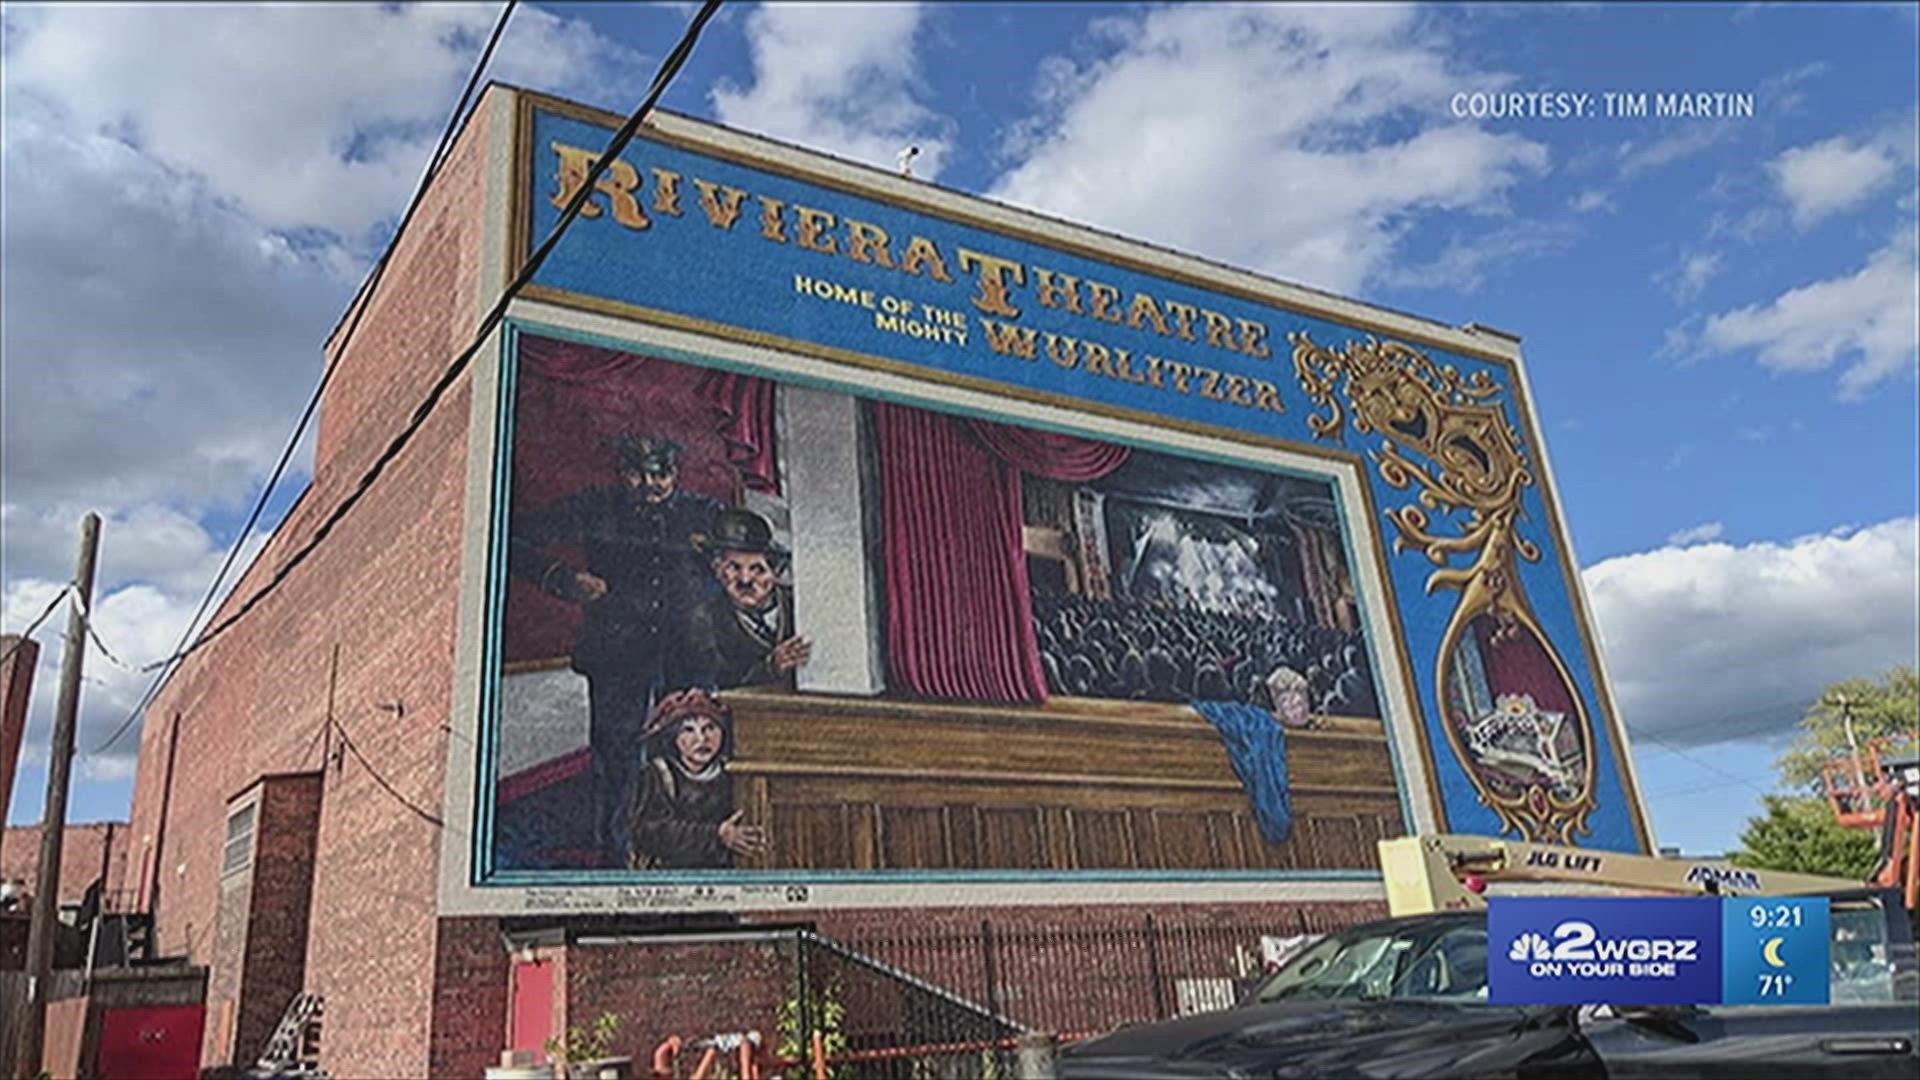 Muralist and decorative painter Tim Martin has finished his mural makeover on the side of the Riviera Theatre in North Tonawanda.